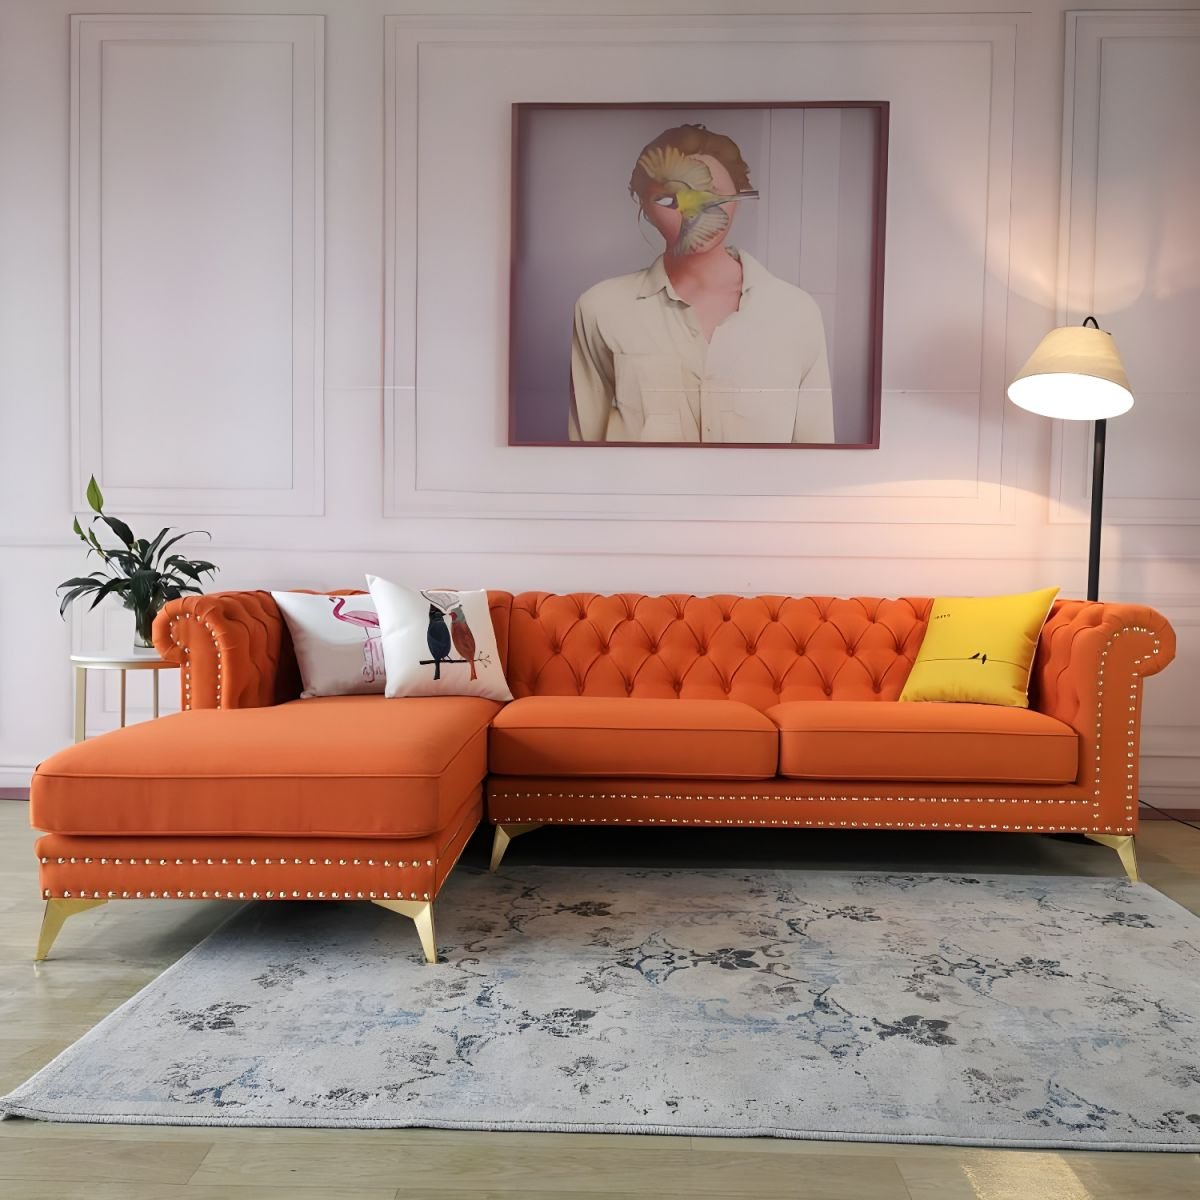 Glamorous Tufted L-Shape Sectional Sofa with Round Arm and Nailhead Trim - Orange Cotton and Linen Left